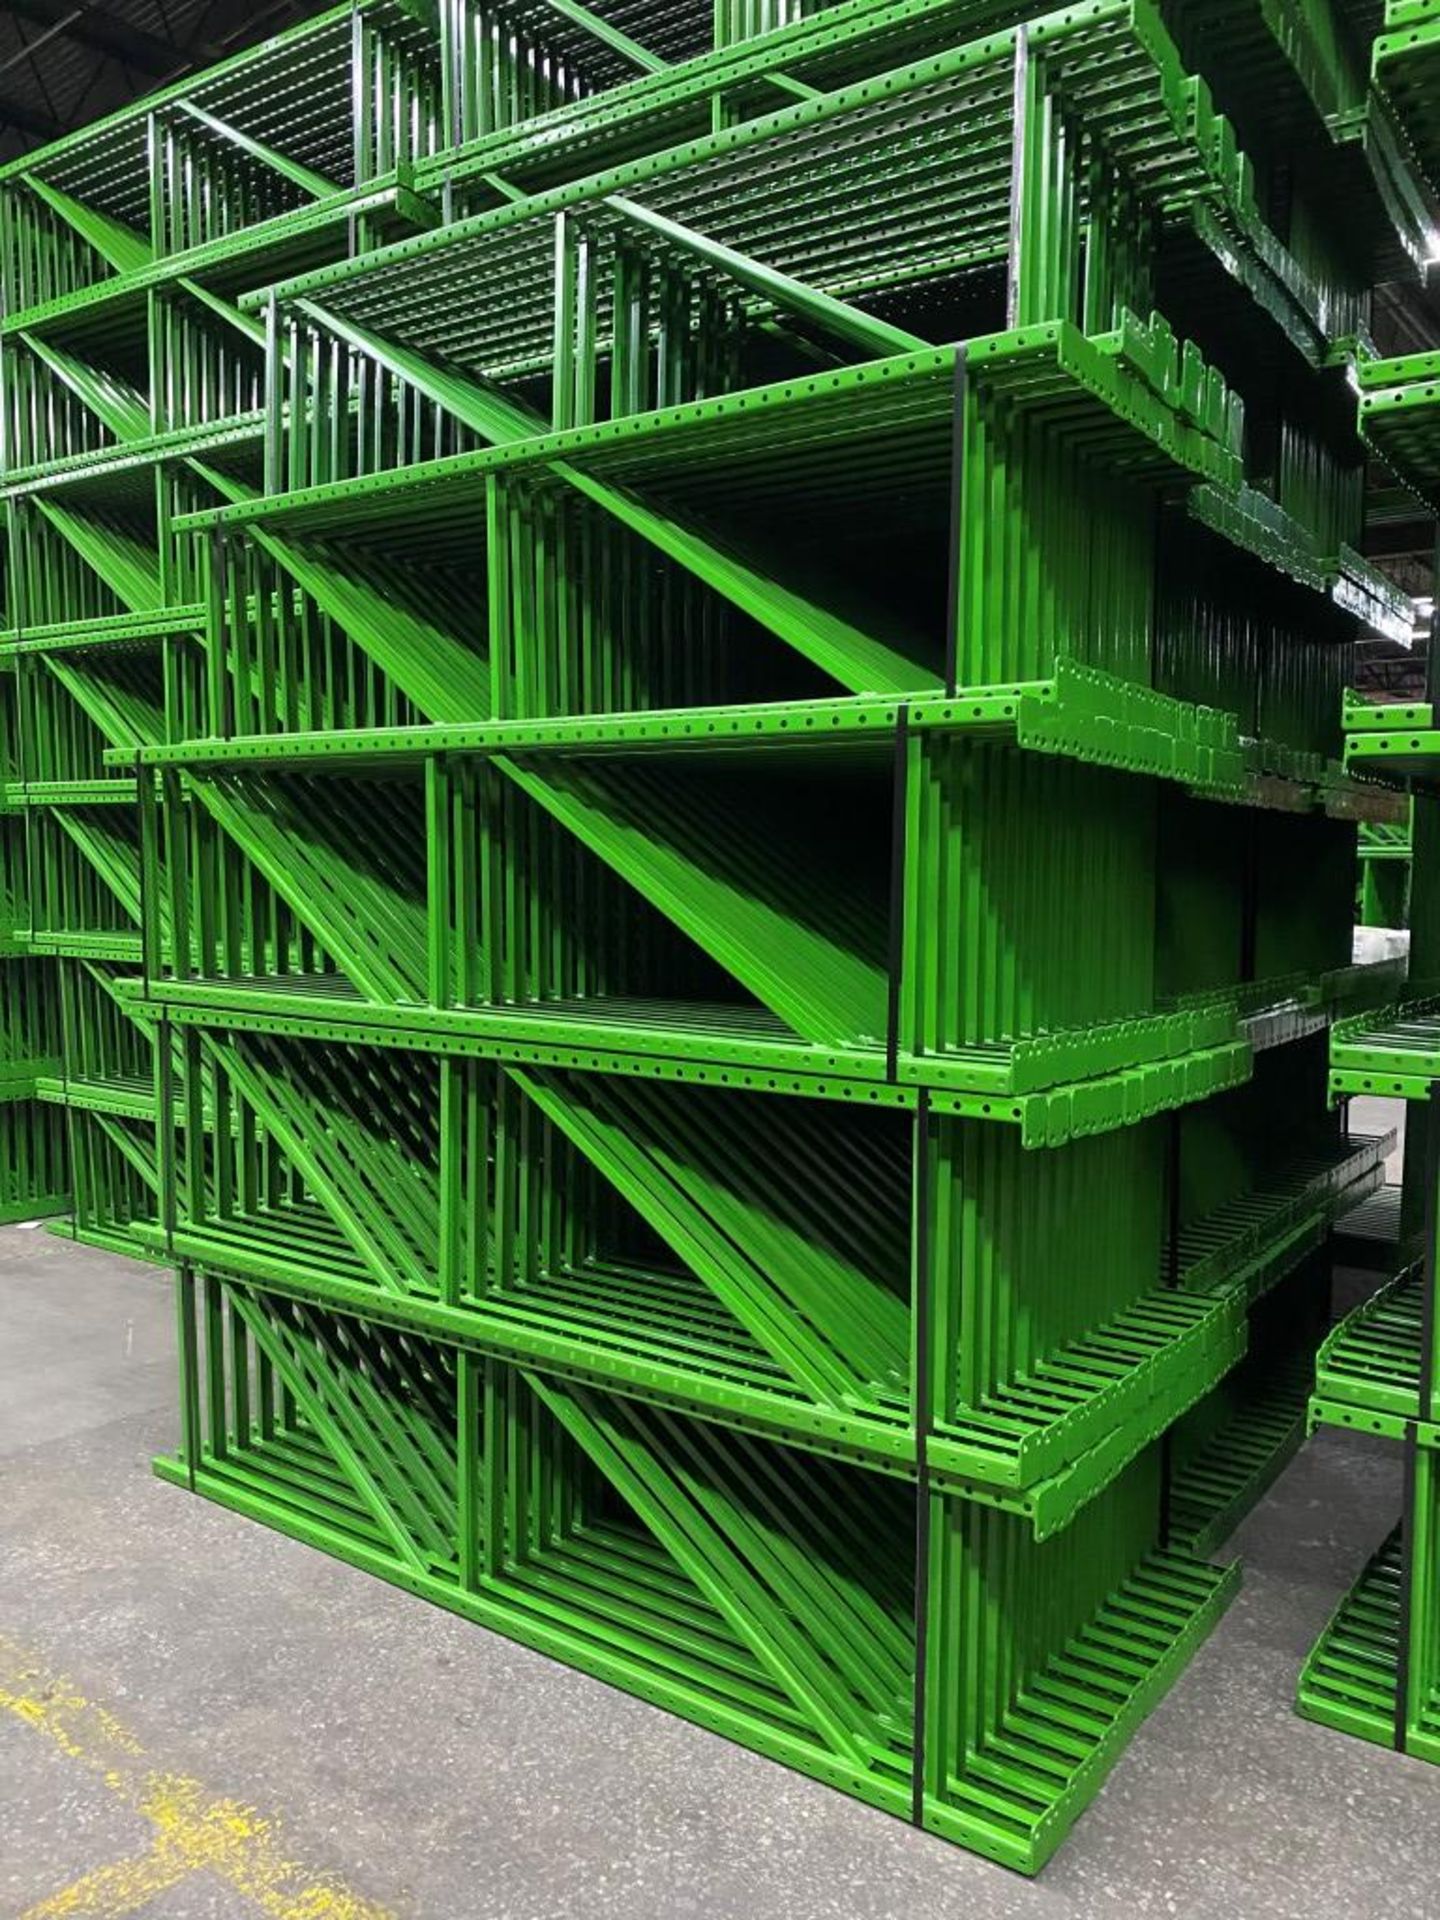 One Lot of Teardrop style Pallet Racks - 9 bays x 3lines x 8'H x 24"D x 96"W with 3 beam levels. - Image 2 of 4